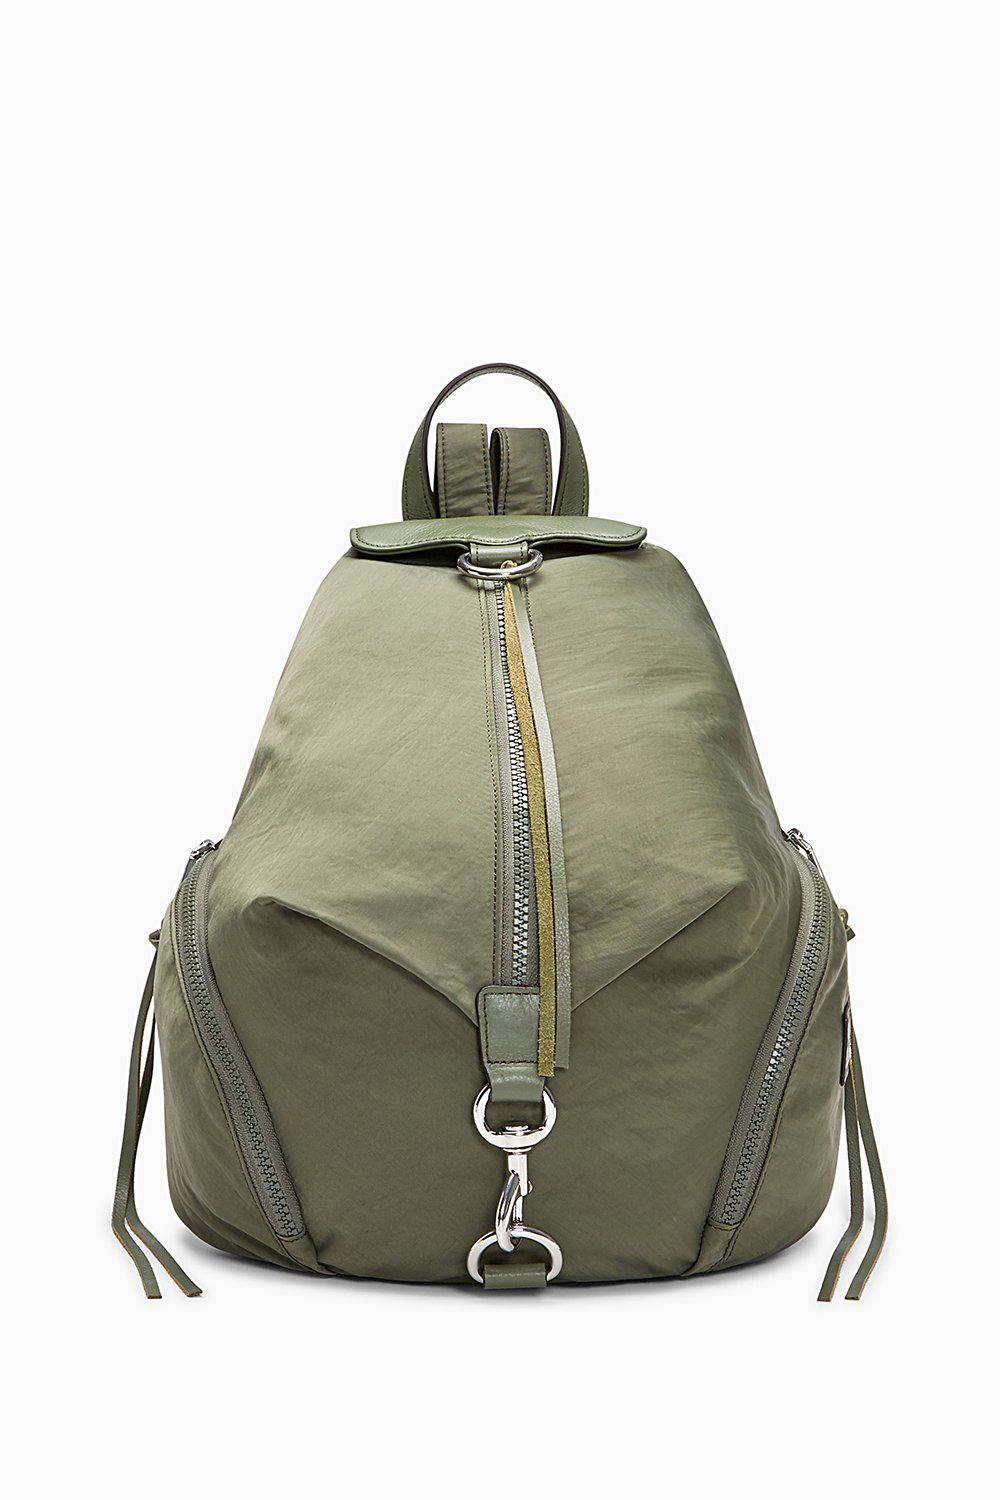 Rebecca Minkoff Synthetic Julian Nylon Backpack in Green - Save 11% - Lyst